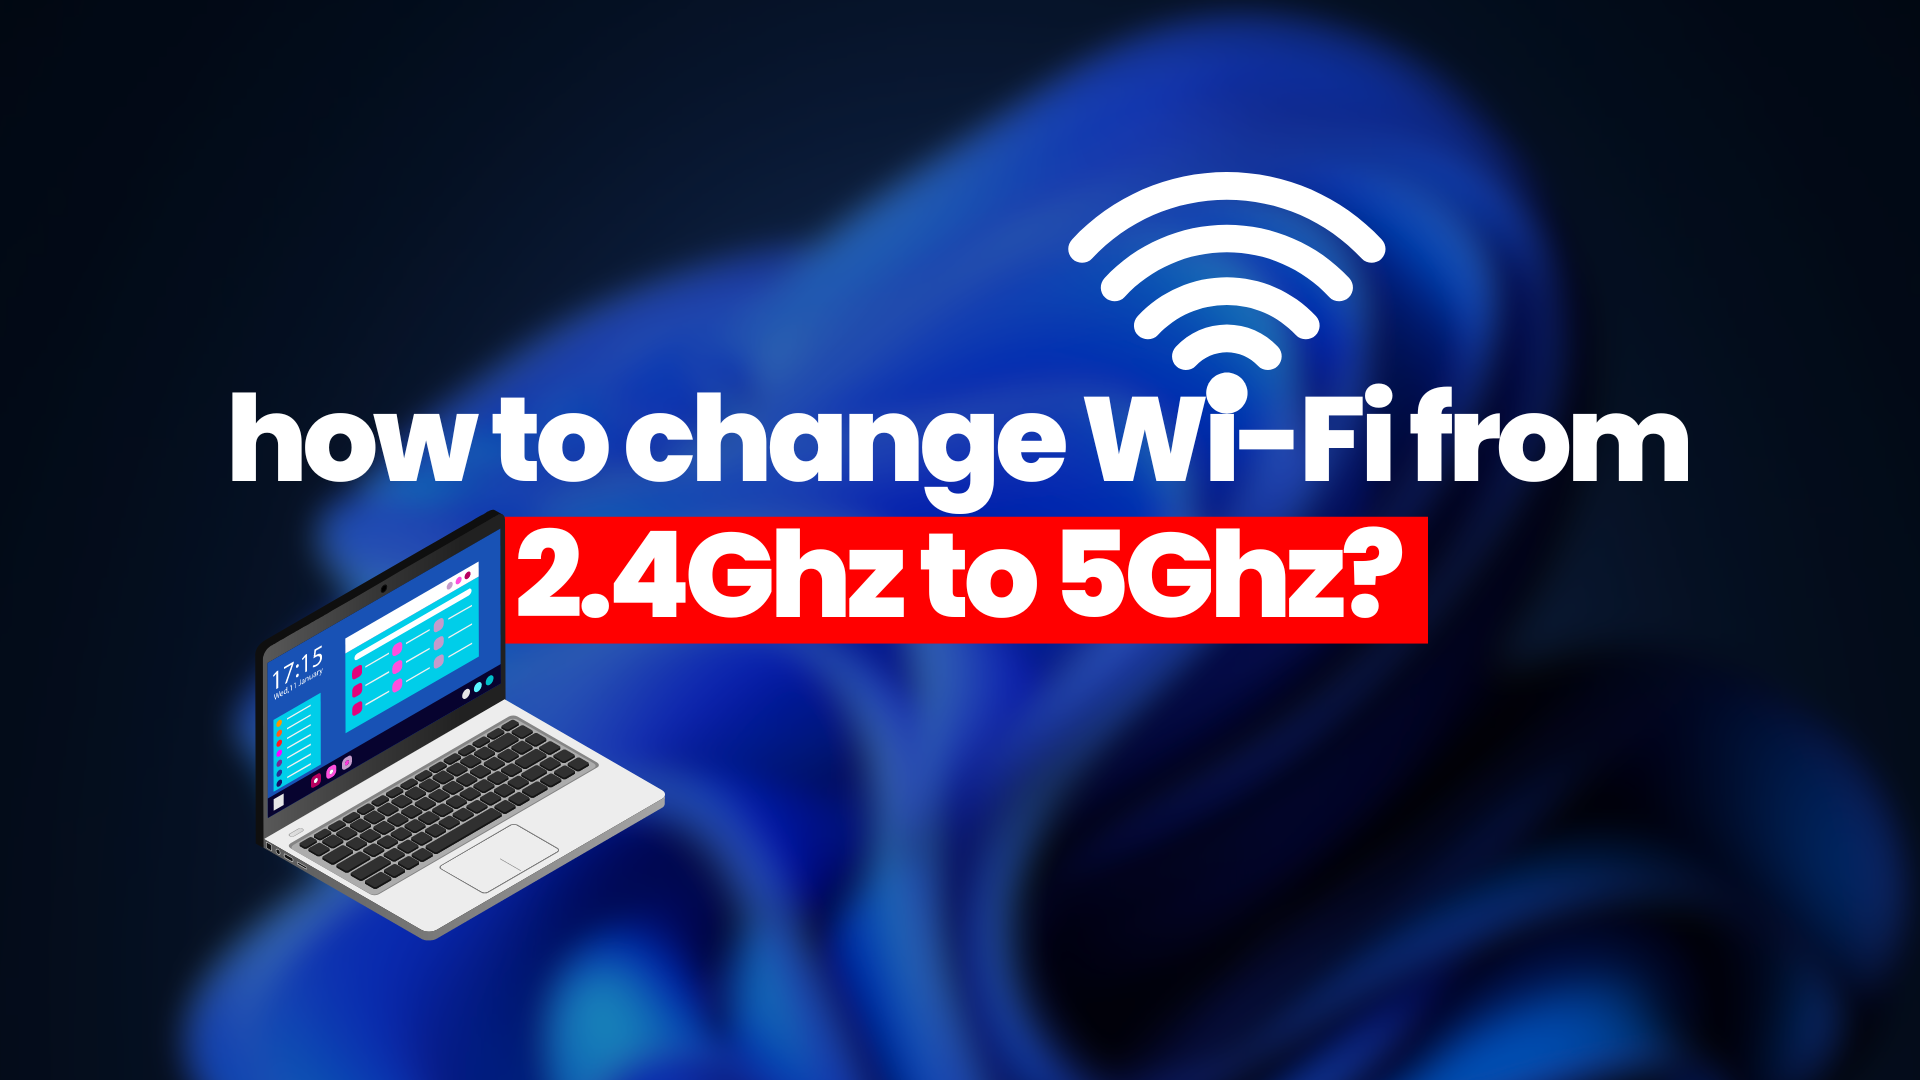 How to Change WiFi from 2.4GHz to 5GHz